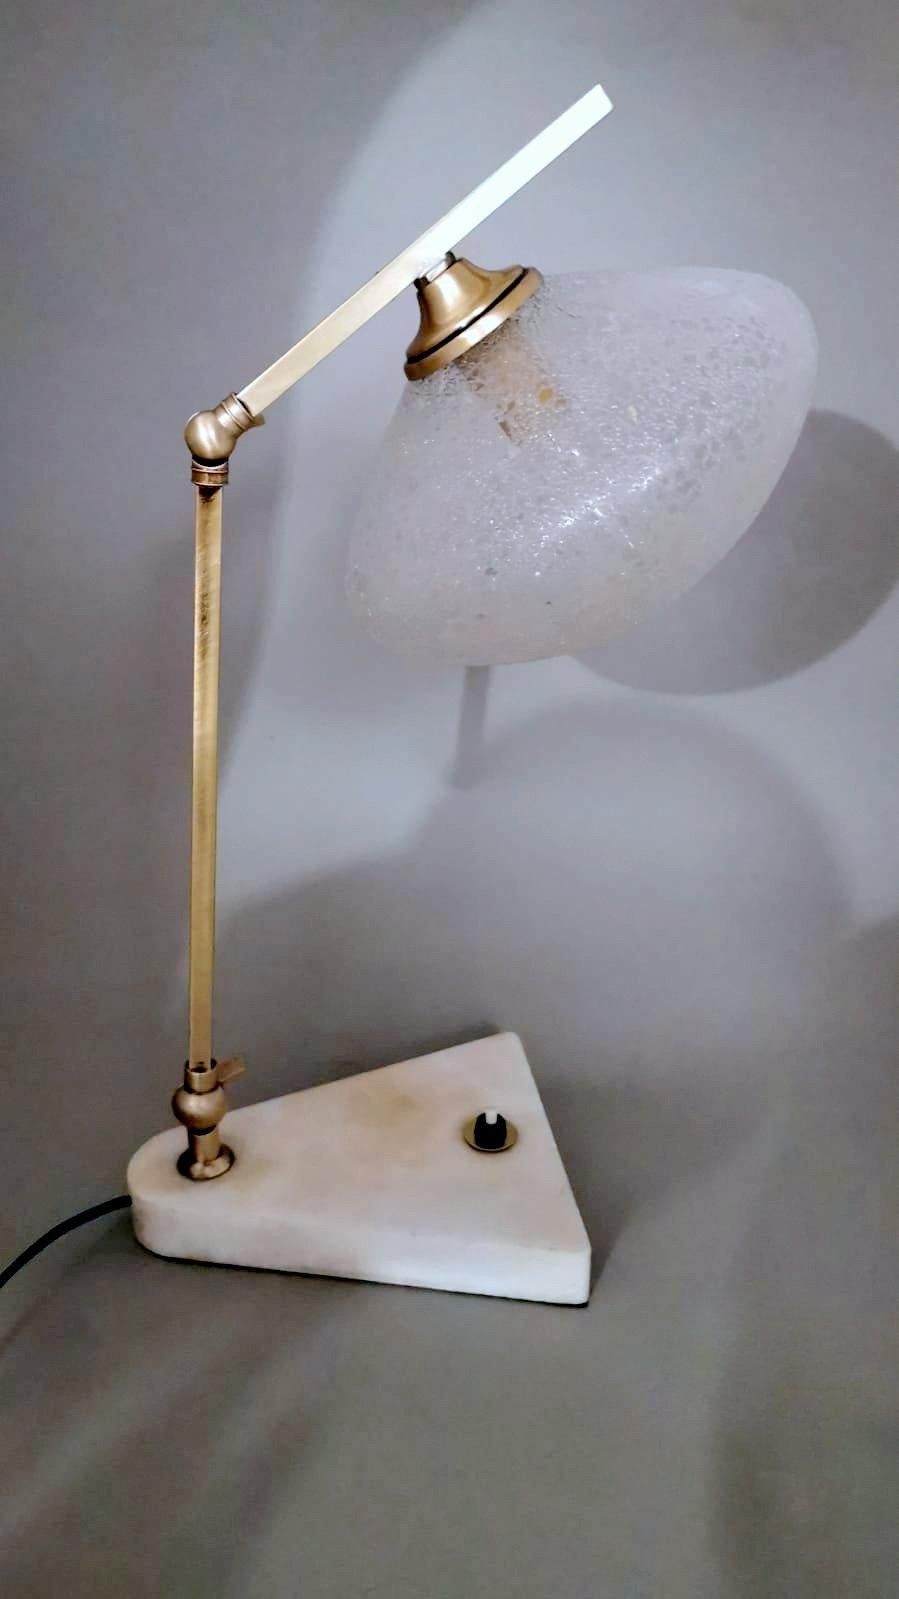 We kindly suggest that you read the whole description, as with it we try to give you detailed technical and historical information to guarantee the authenticity of our objects.
Practical and functional table lamp; the base, made of White Carrara